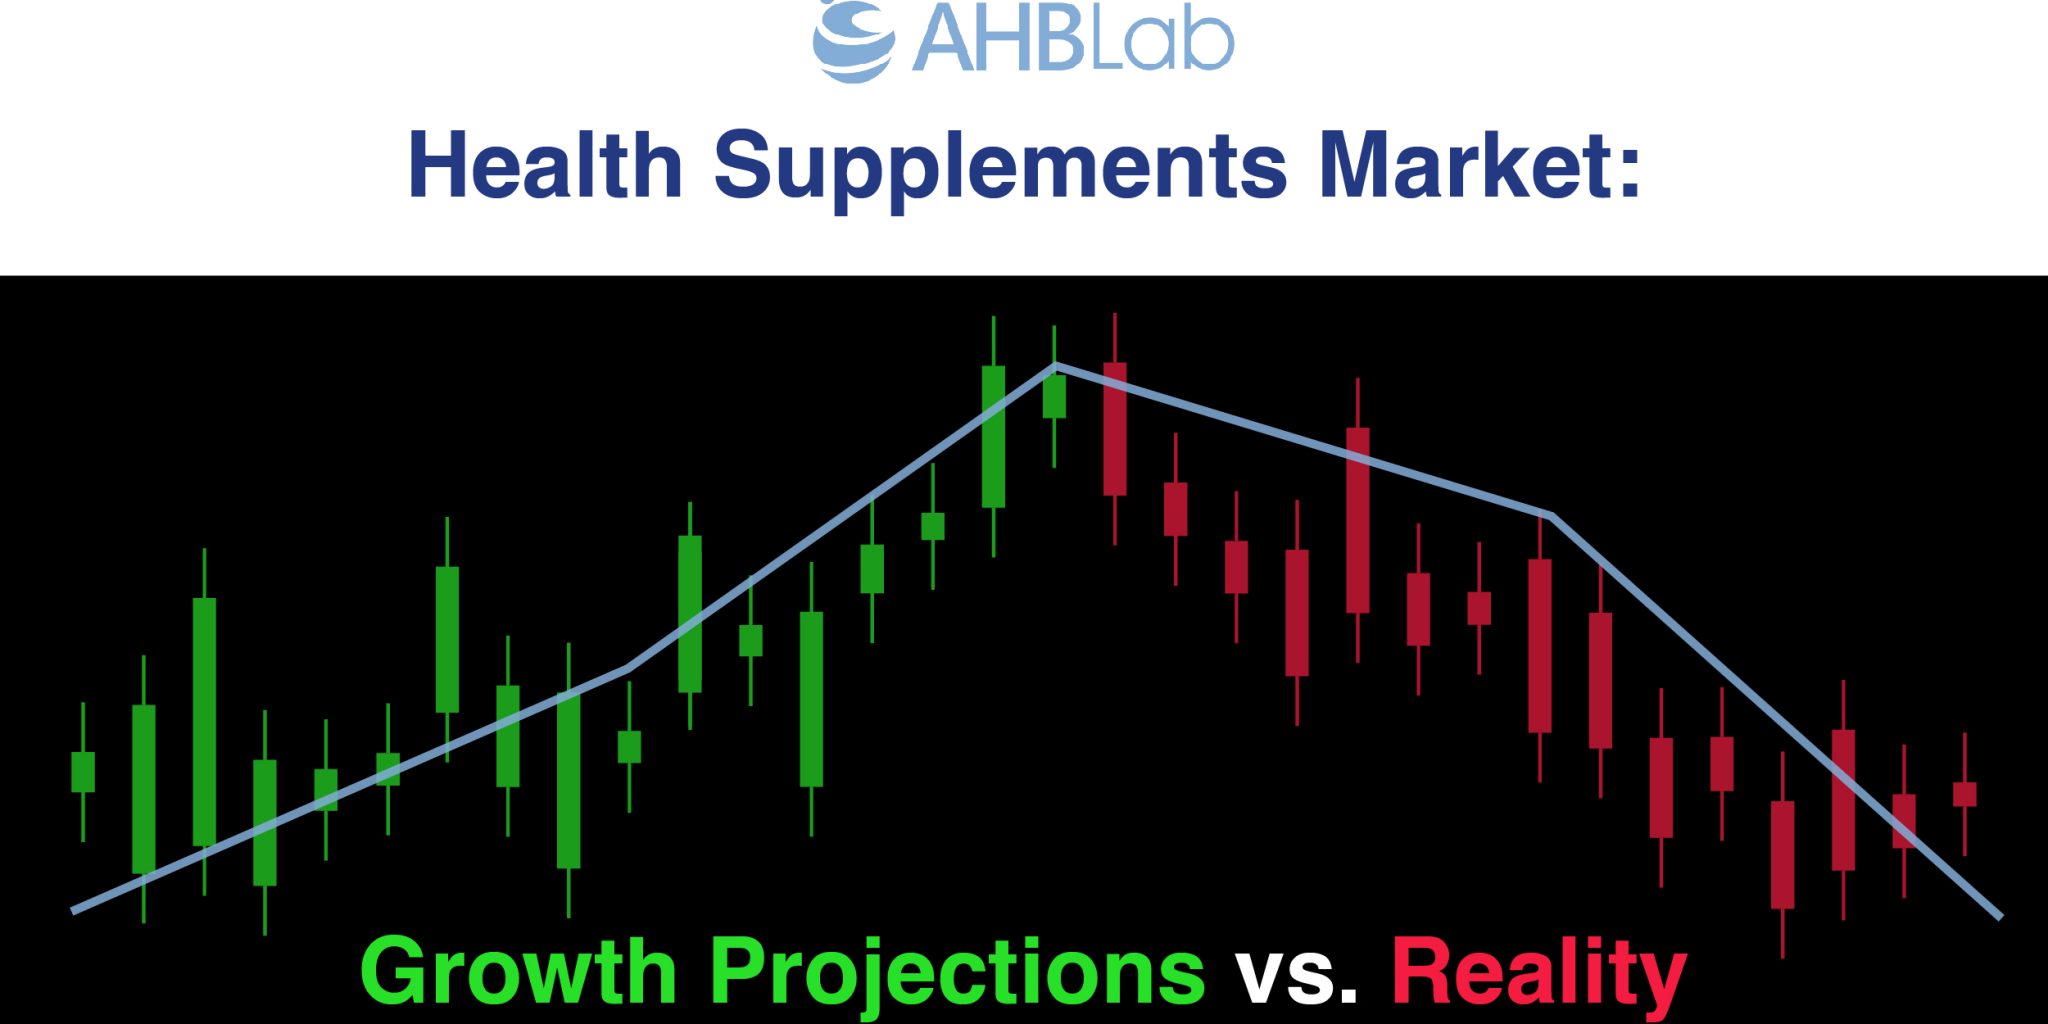 Robust Growth Projections vs. Ground Reality